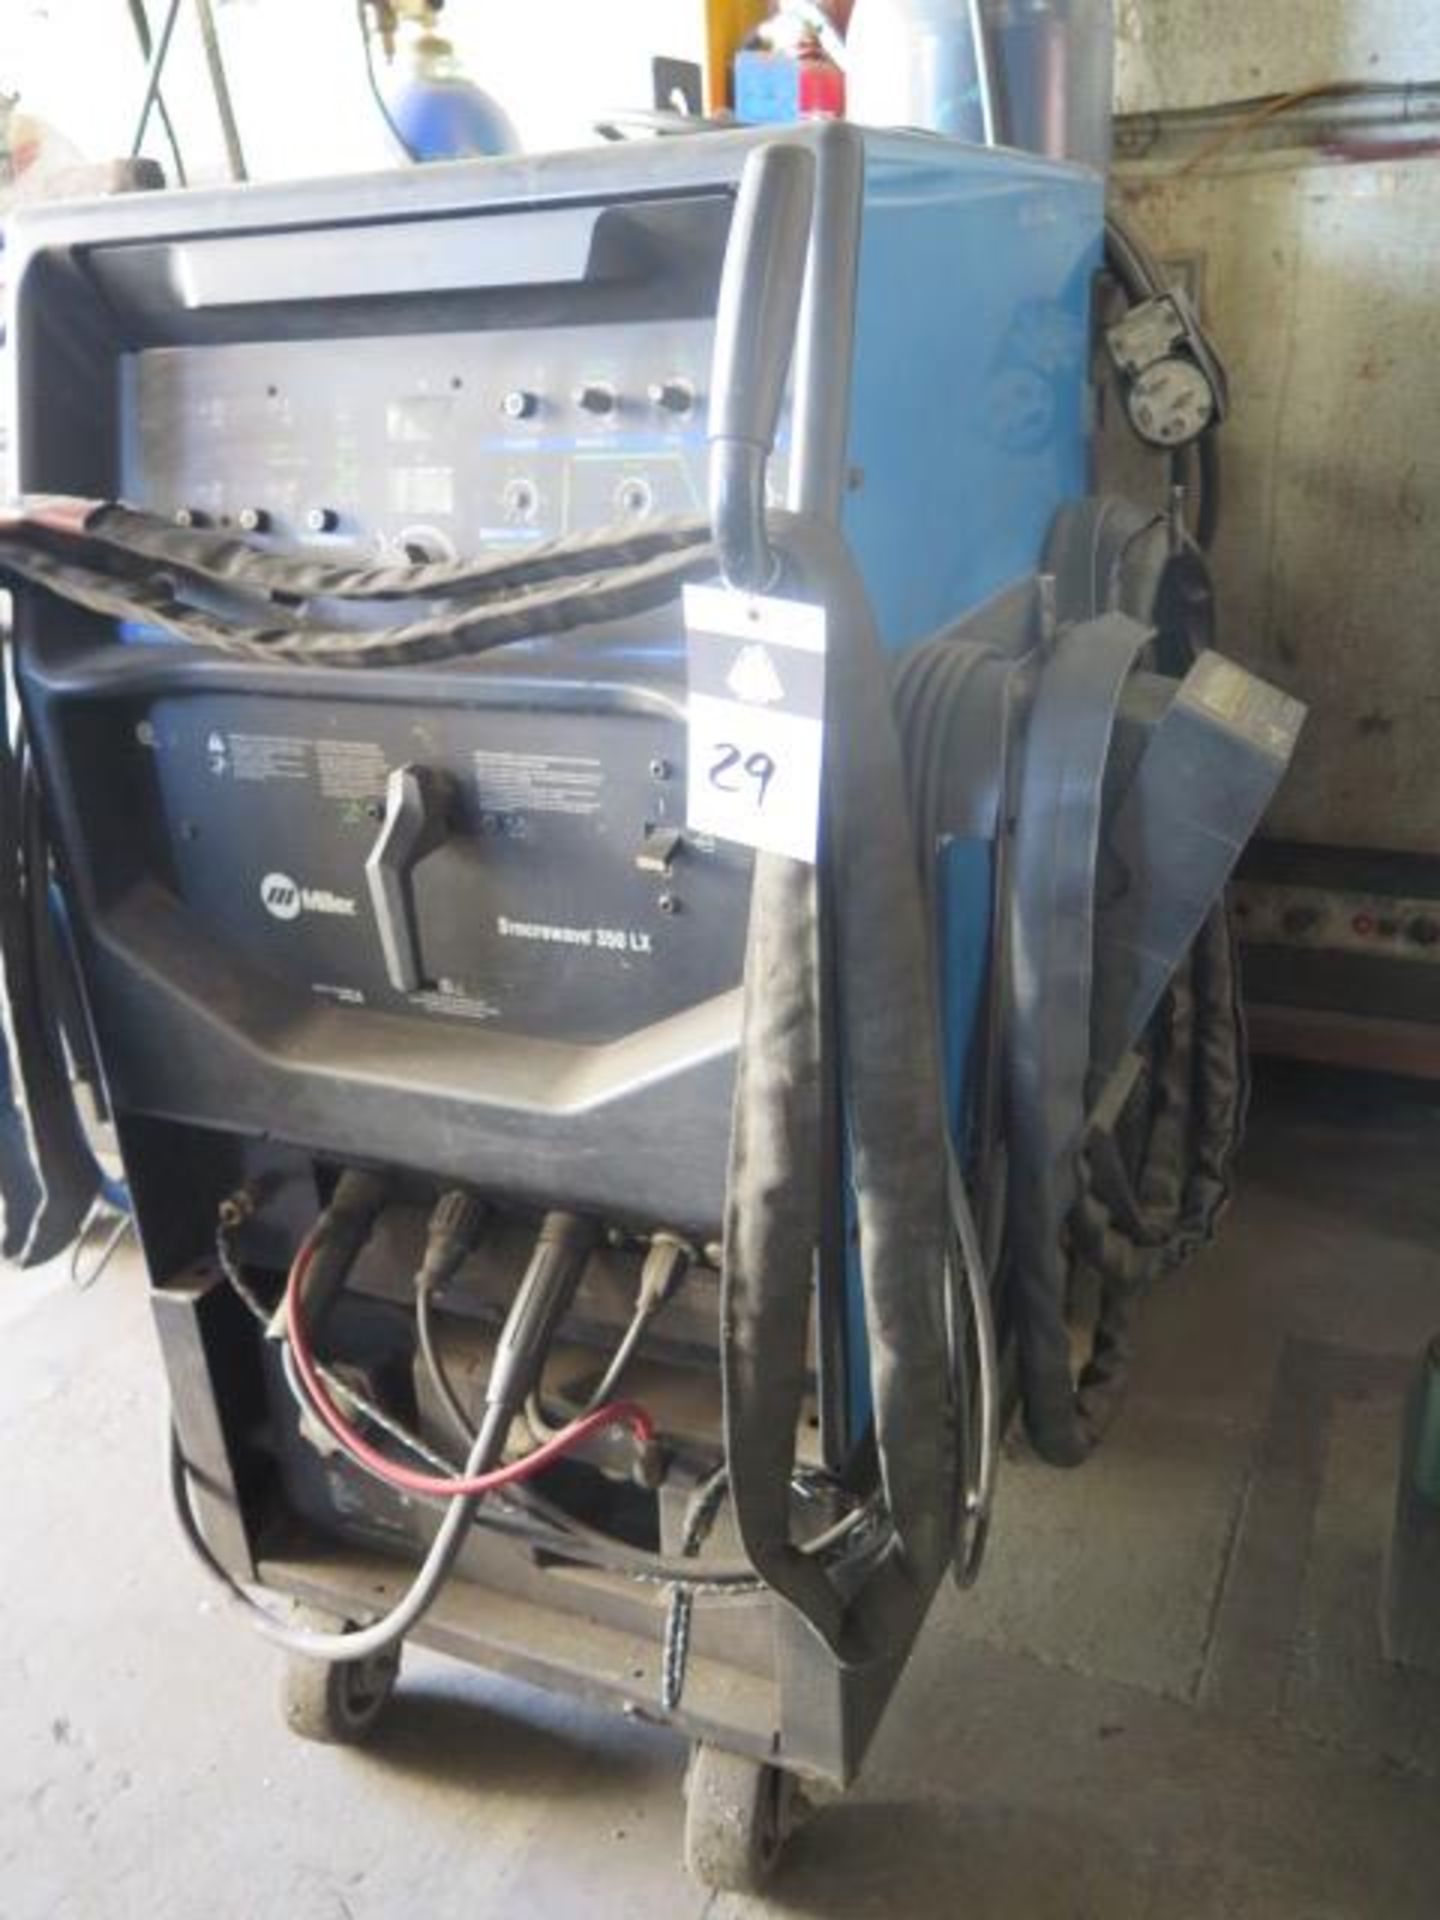 Miller Syncrowave 350LX Arc Welding Power Source s/n LH260315L w/ Cooler Cart (NO TANK) (SOLD AS-IS - Image 2 of 10